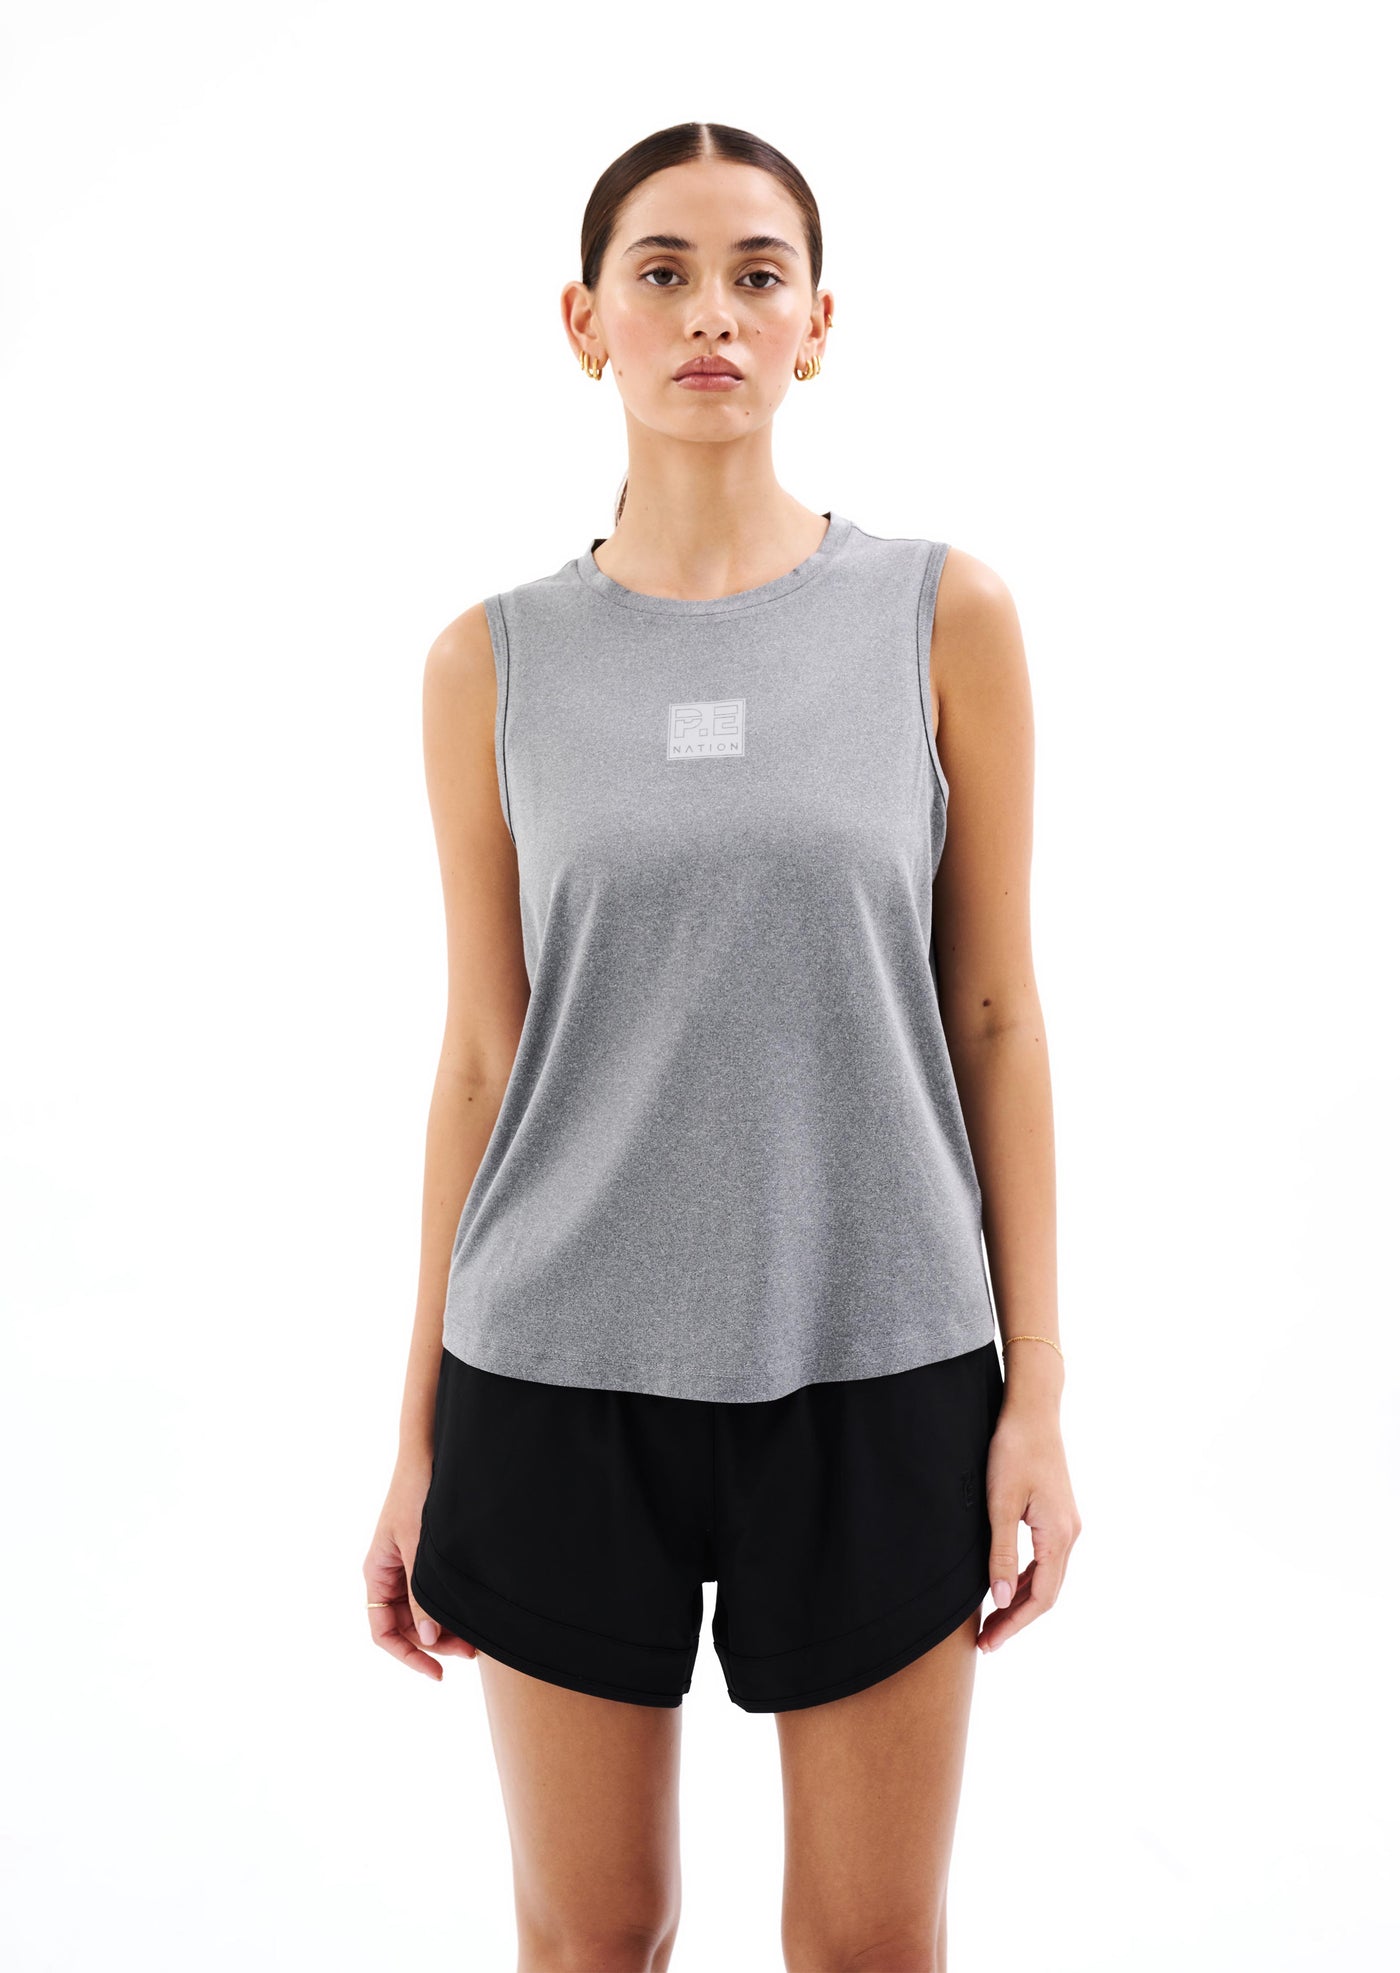 CROSSOVER MARLE AIR FORM TANK IN GREY MARLE